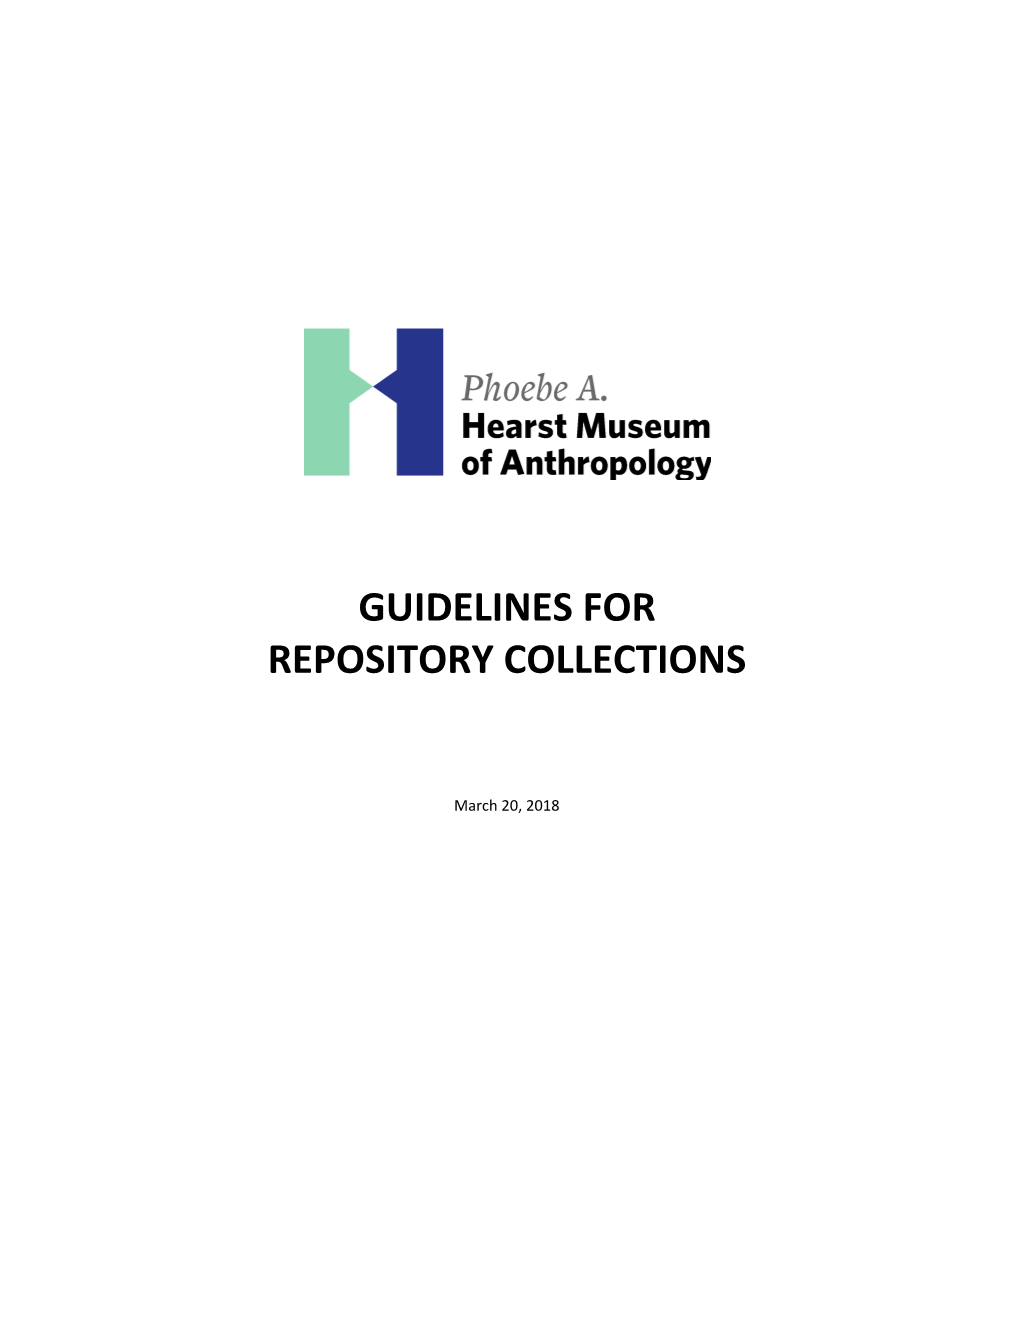 Guidelines for Repository Collections